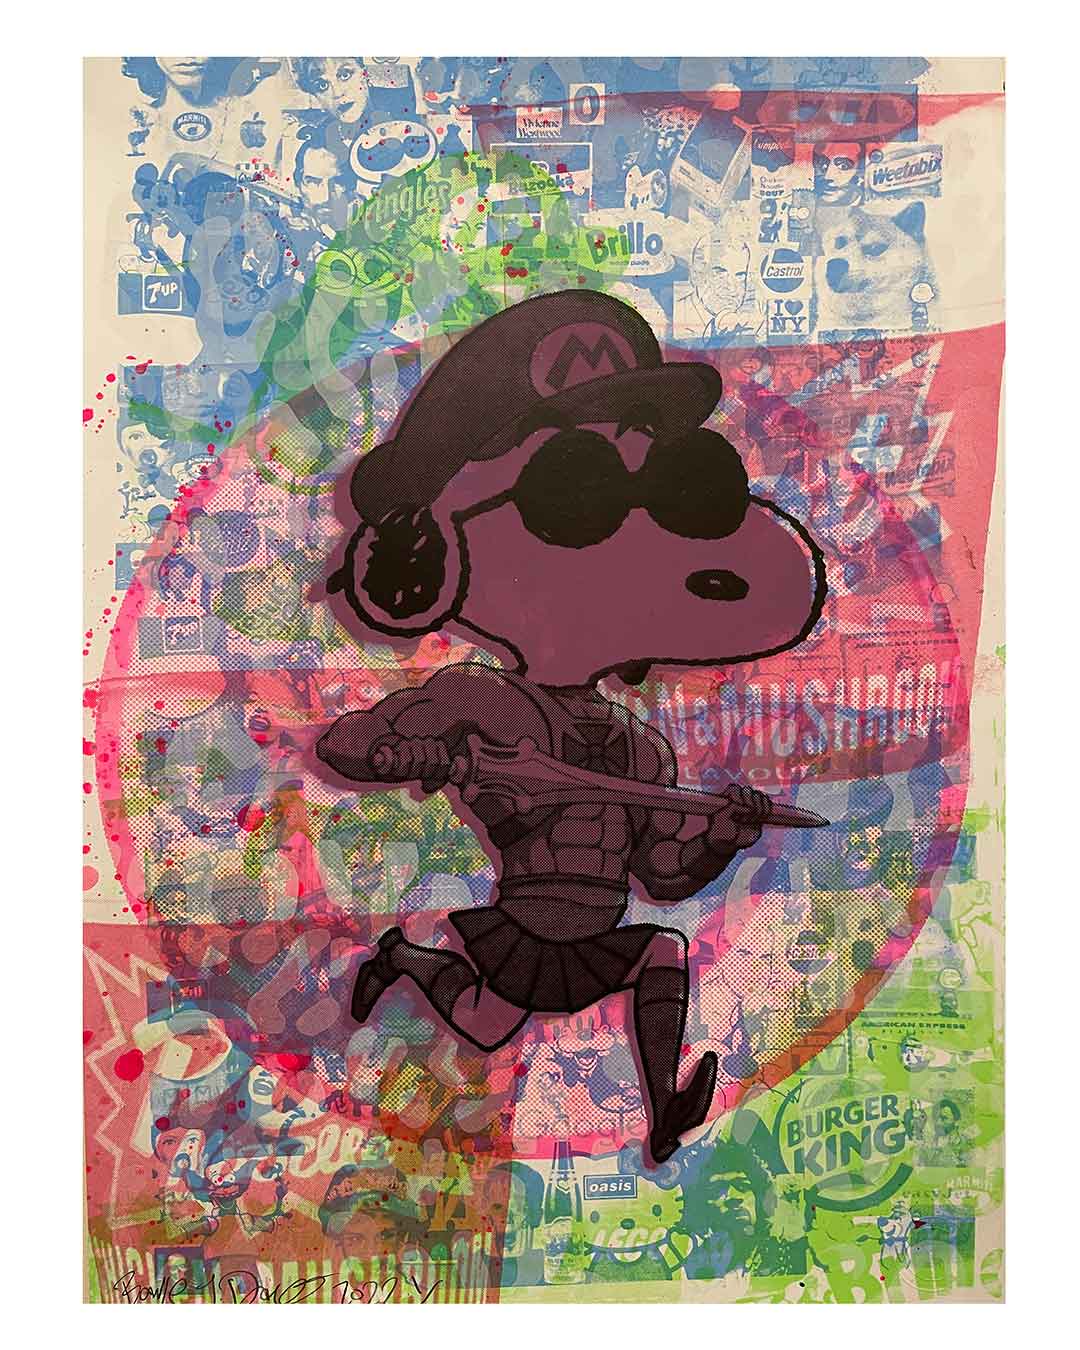 Purple Dude Print by Barrie J Davies 2022, unframed Silkscreen print on paper (hand finished) edition of 1/1, A2 size 42cm x 59.4cm.